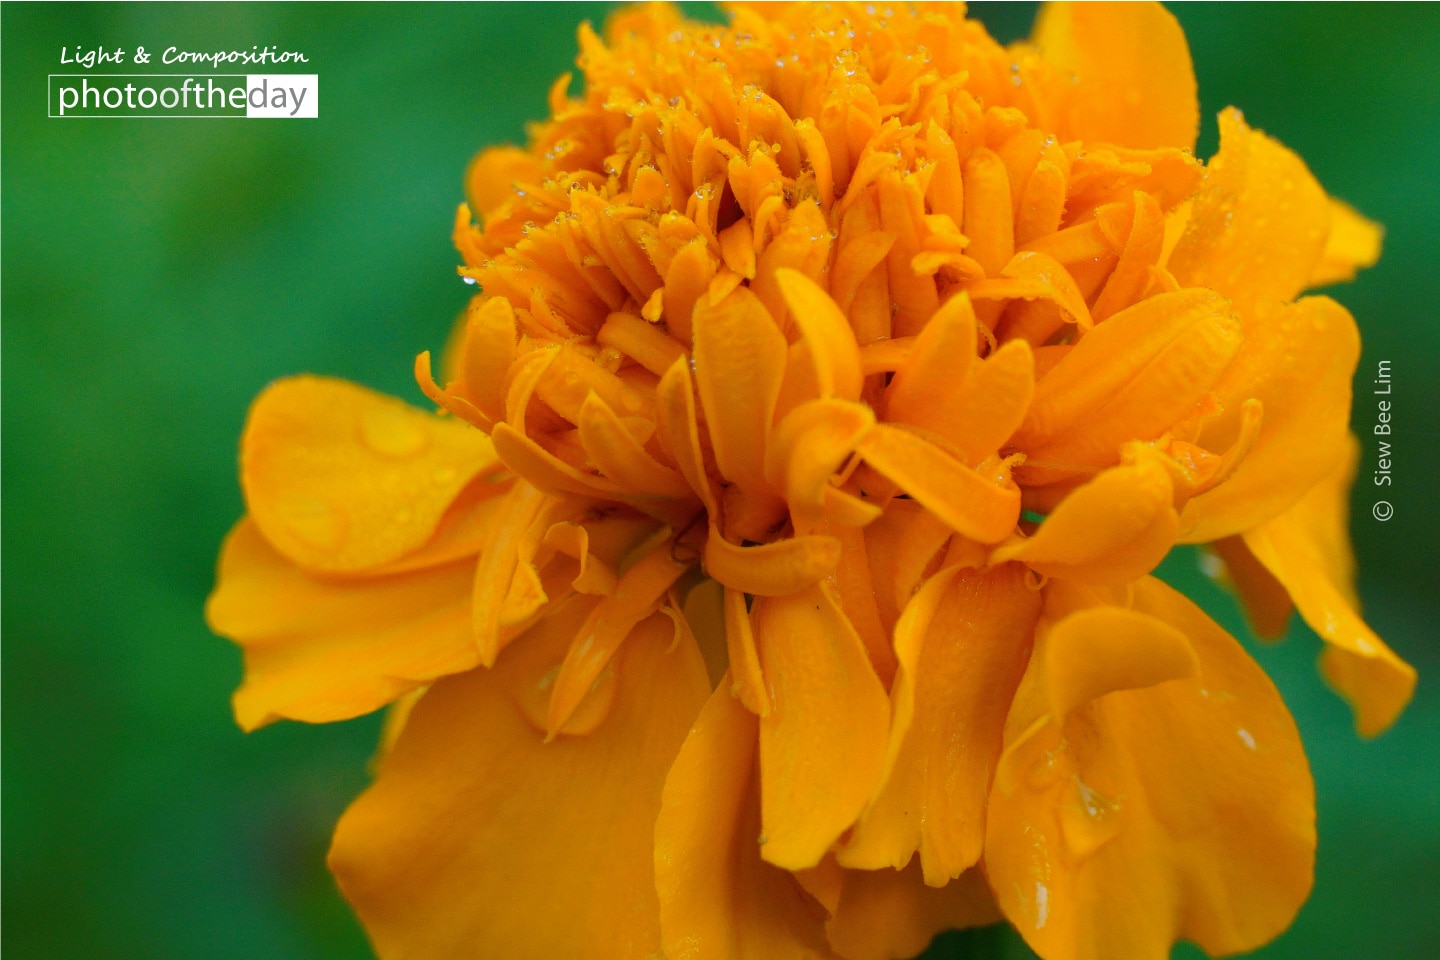 Marigold by Siew Bee Lim